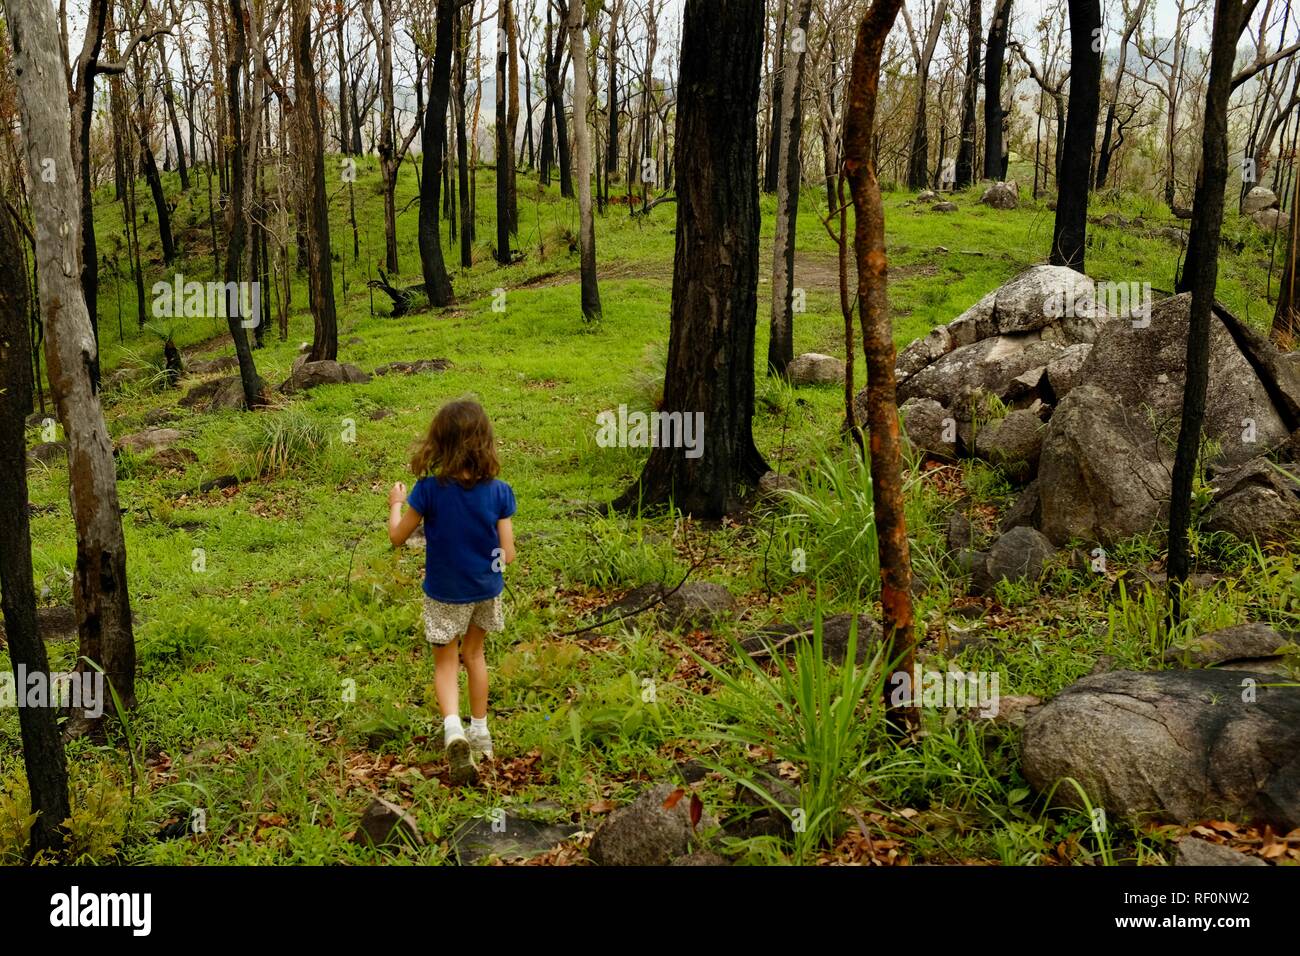 Child walking through green grass in the regrowth of a eucalyptus forest after a fire, Mia Mia State Forest, Queensland, Australia Stock Photo